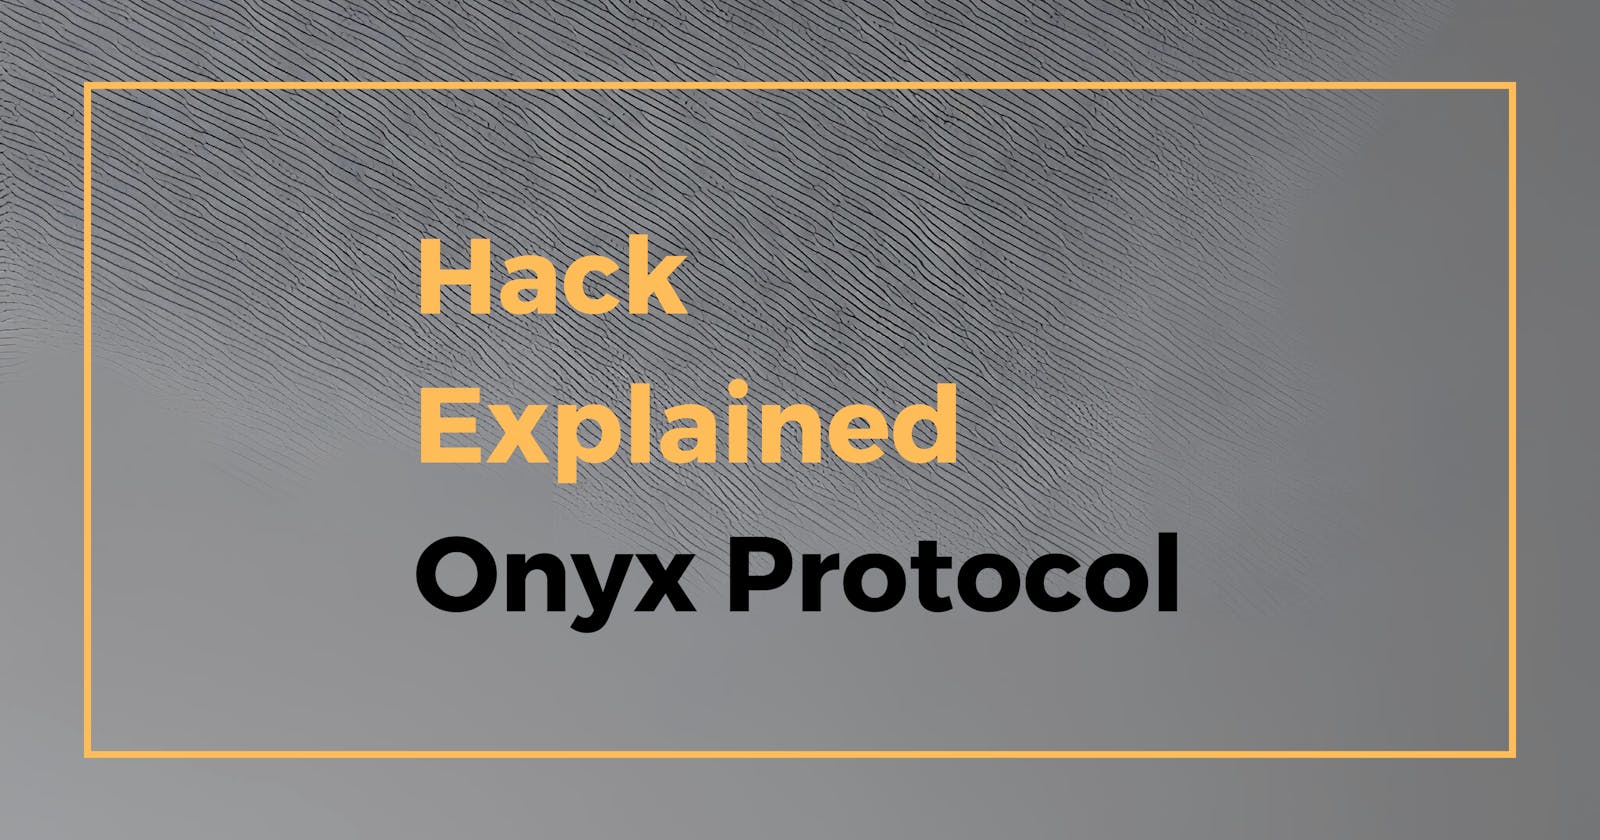 Common Vulnerability Causes $2.1M Loss for Onyx Protocol